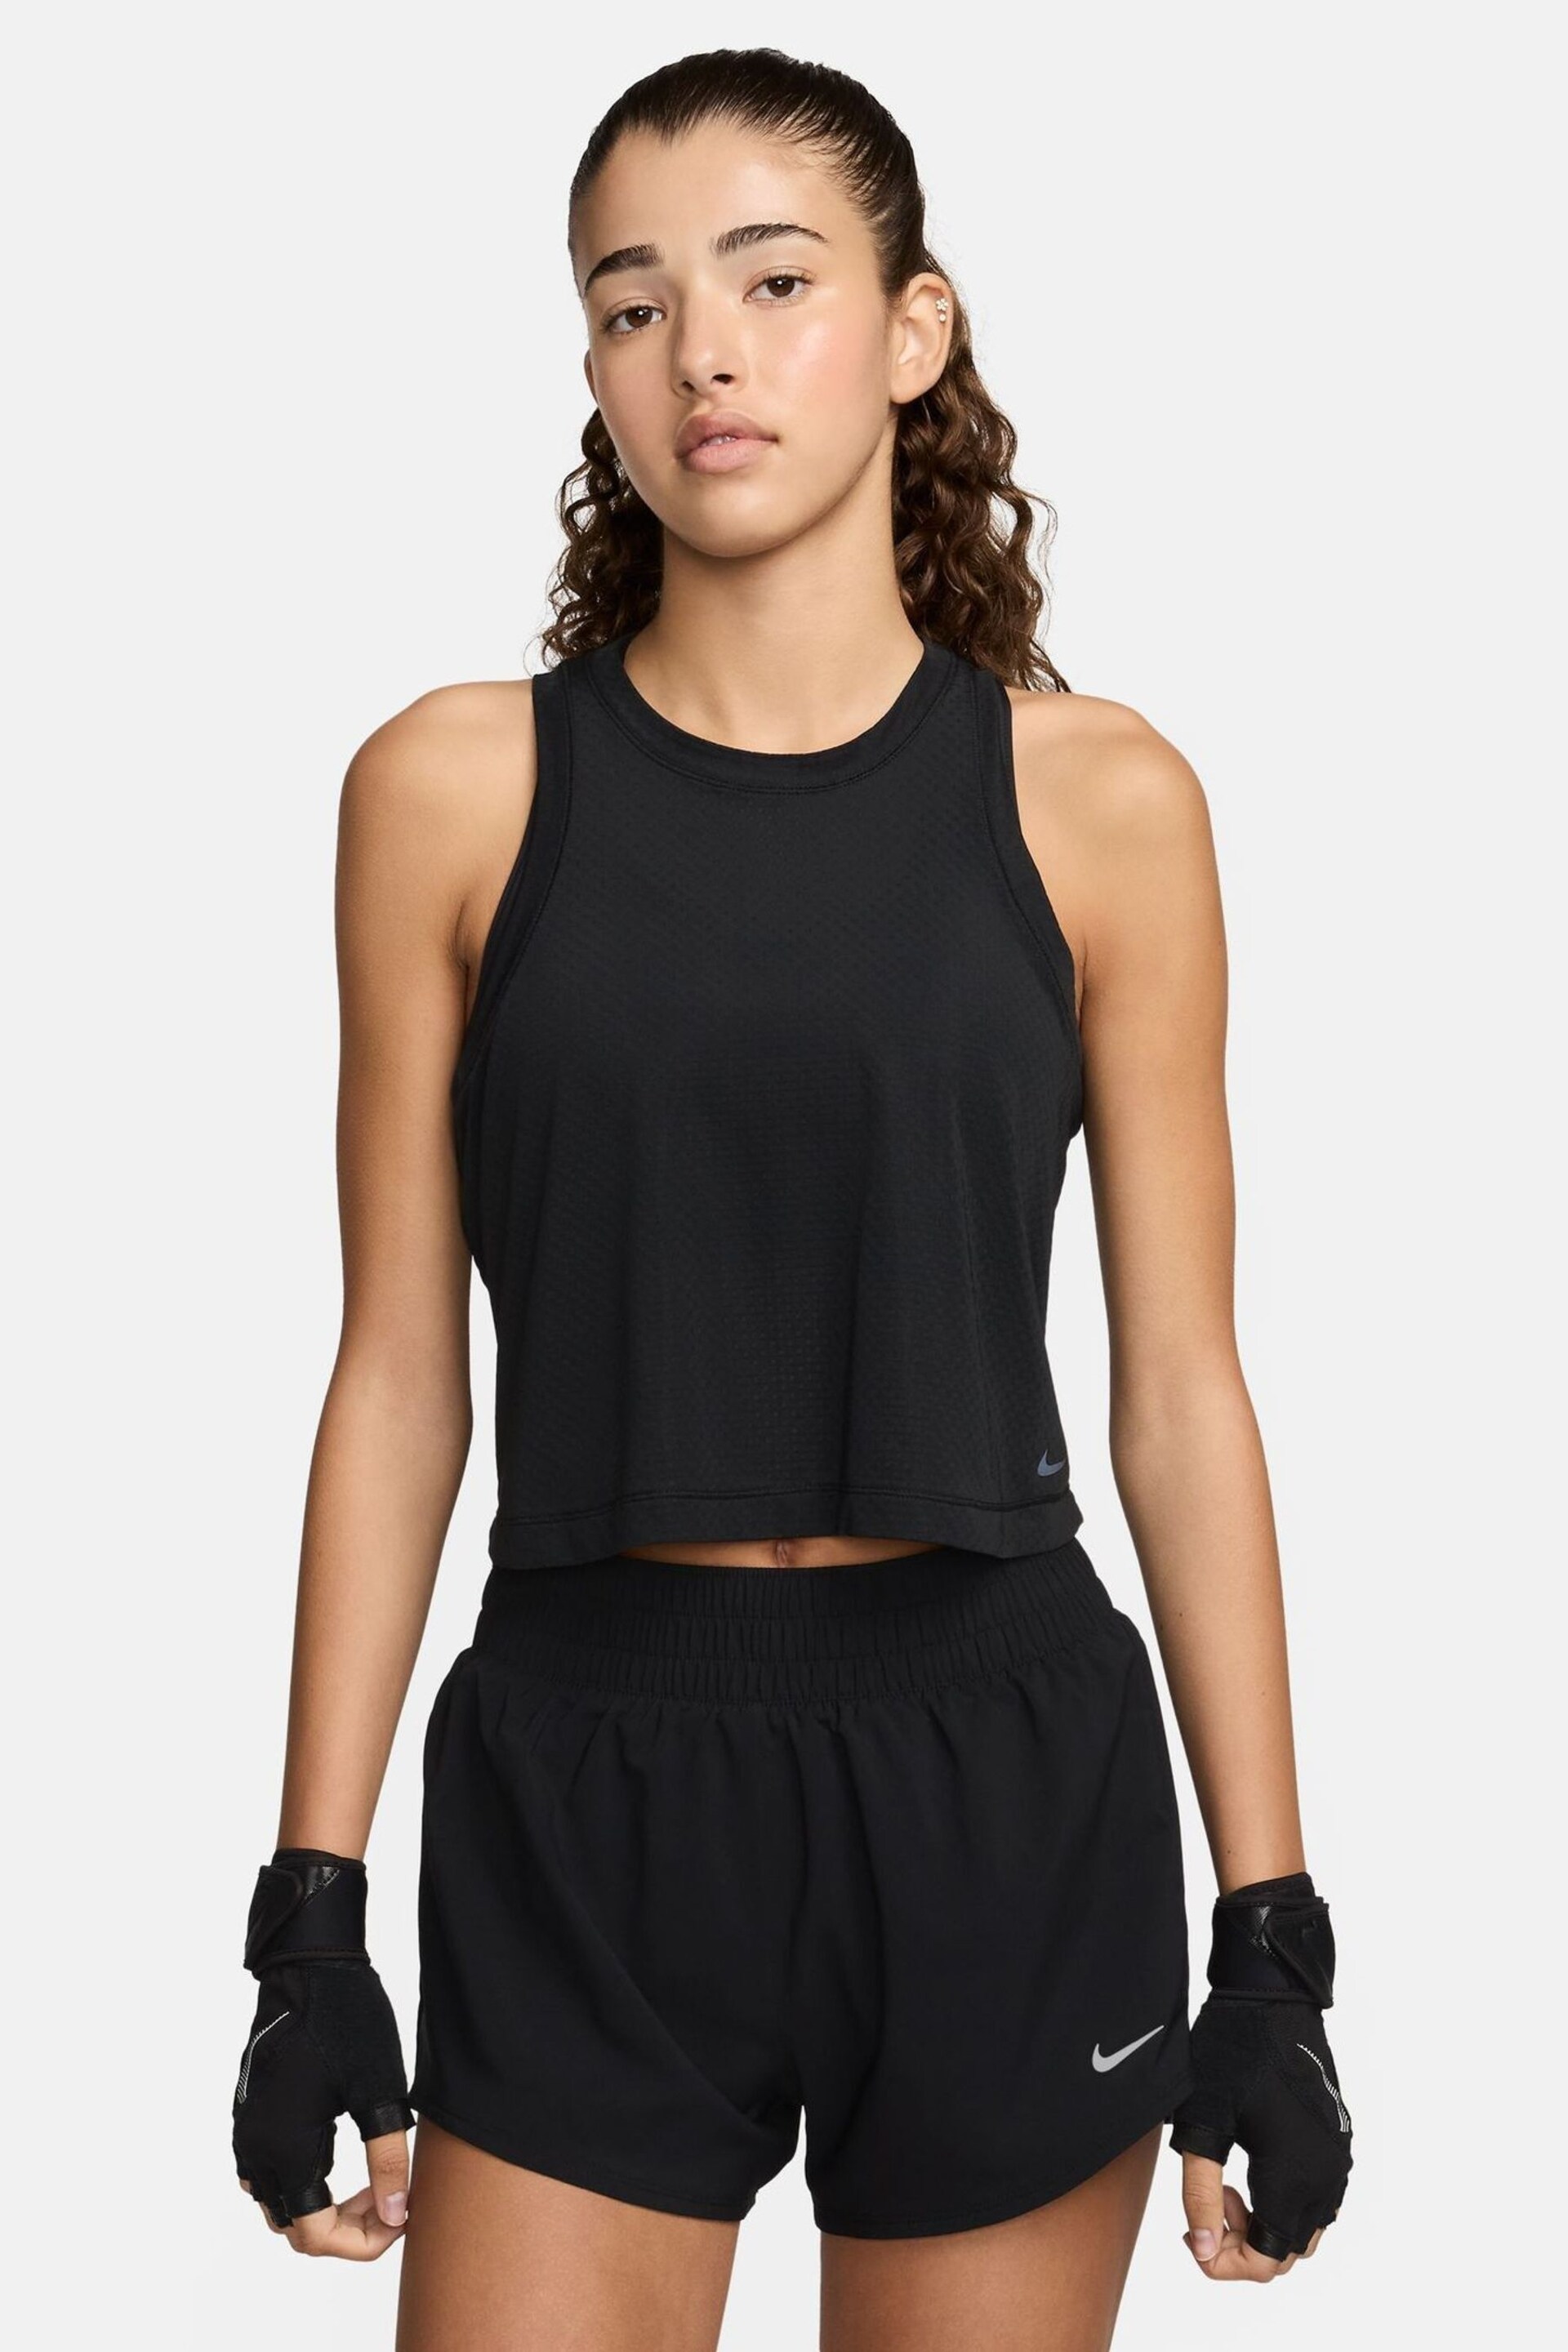 Nike Black Dri-FIT One Classic Breathable Vest Top - Image 1 of 7